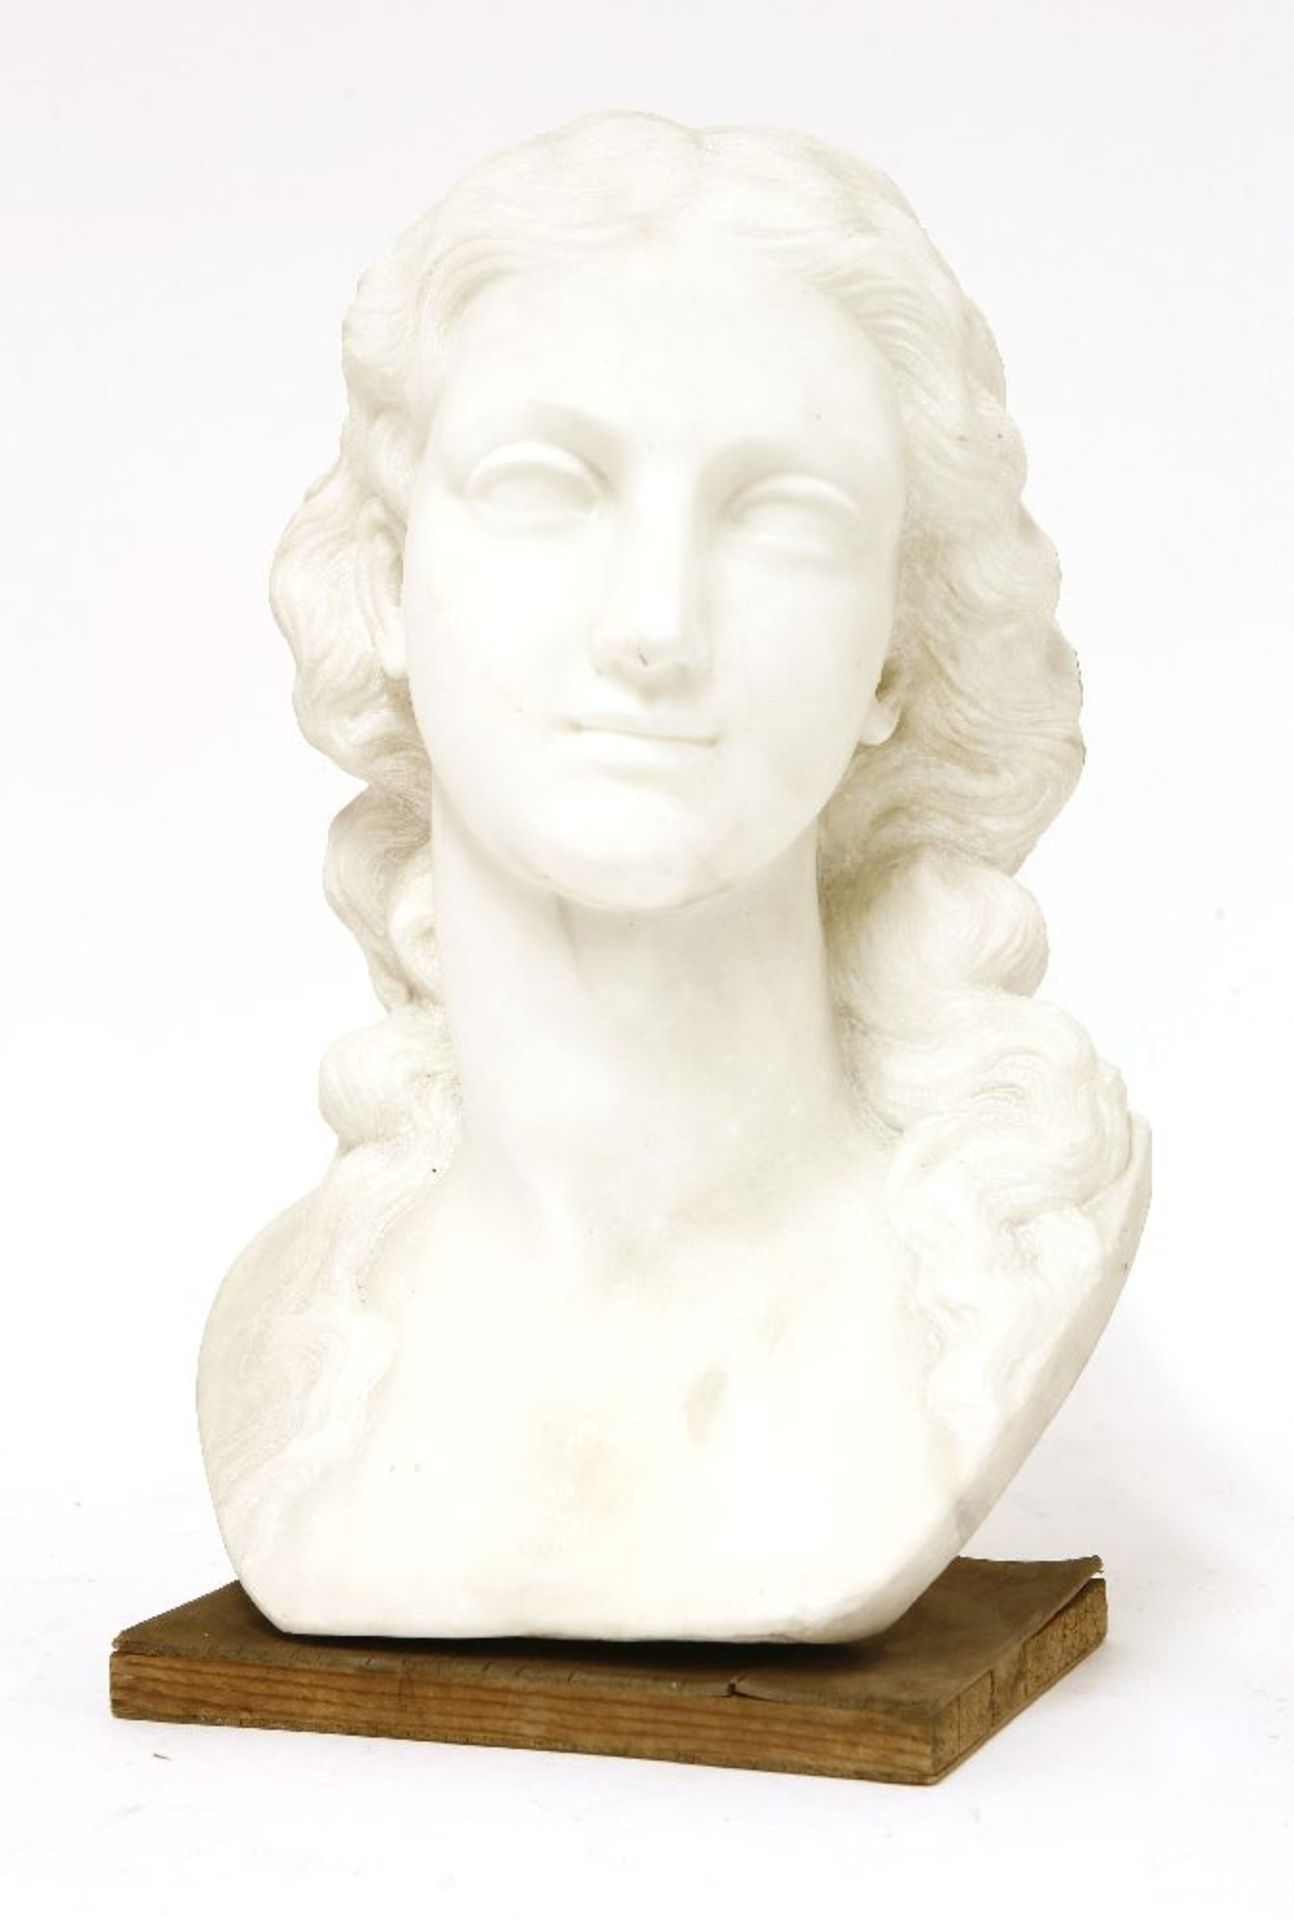 A marble bust,20th century, of a lady with flowing hair, on a plywood plinth,38cm high - Image 3 of 3